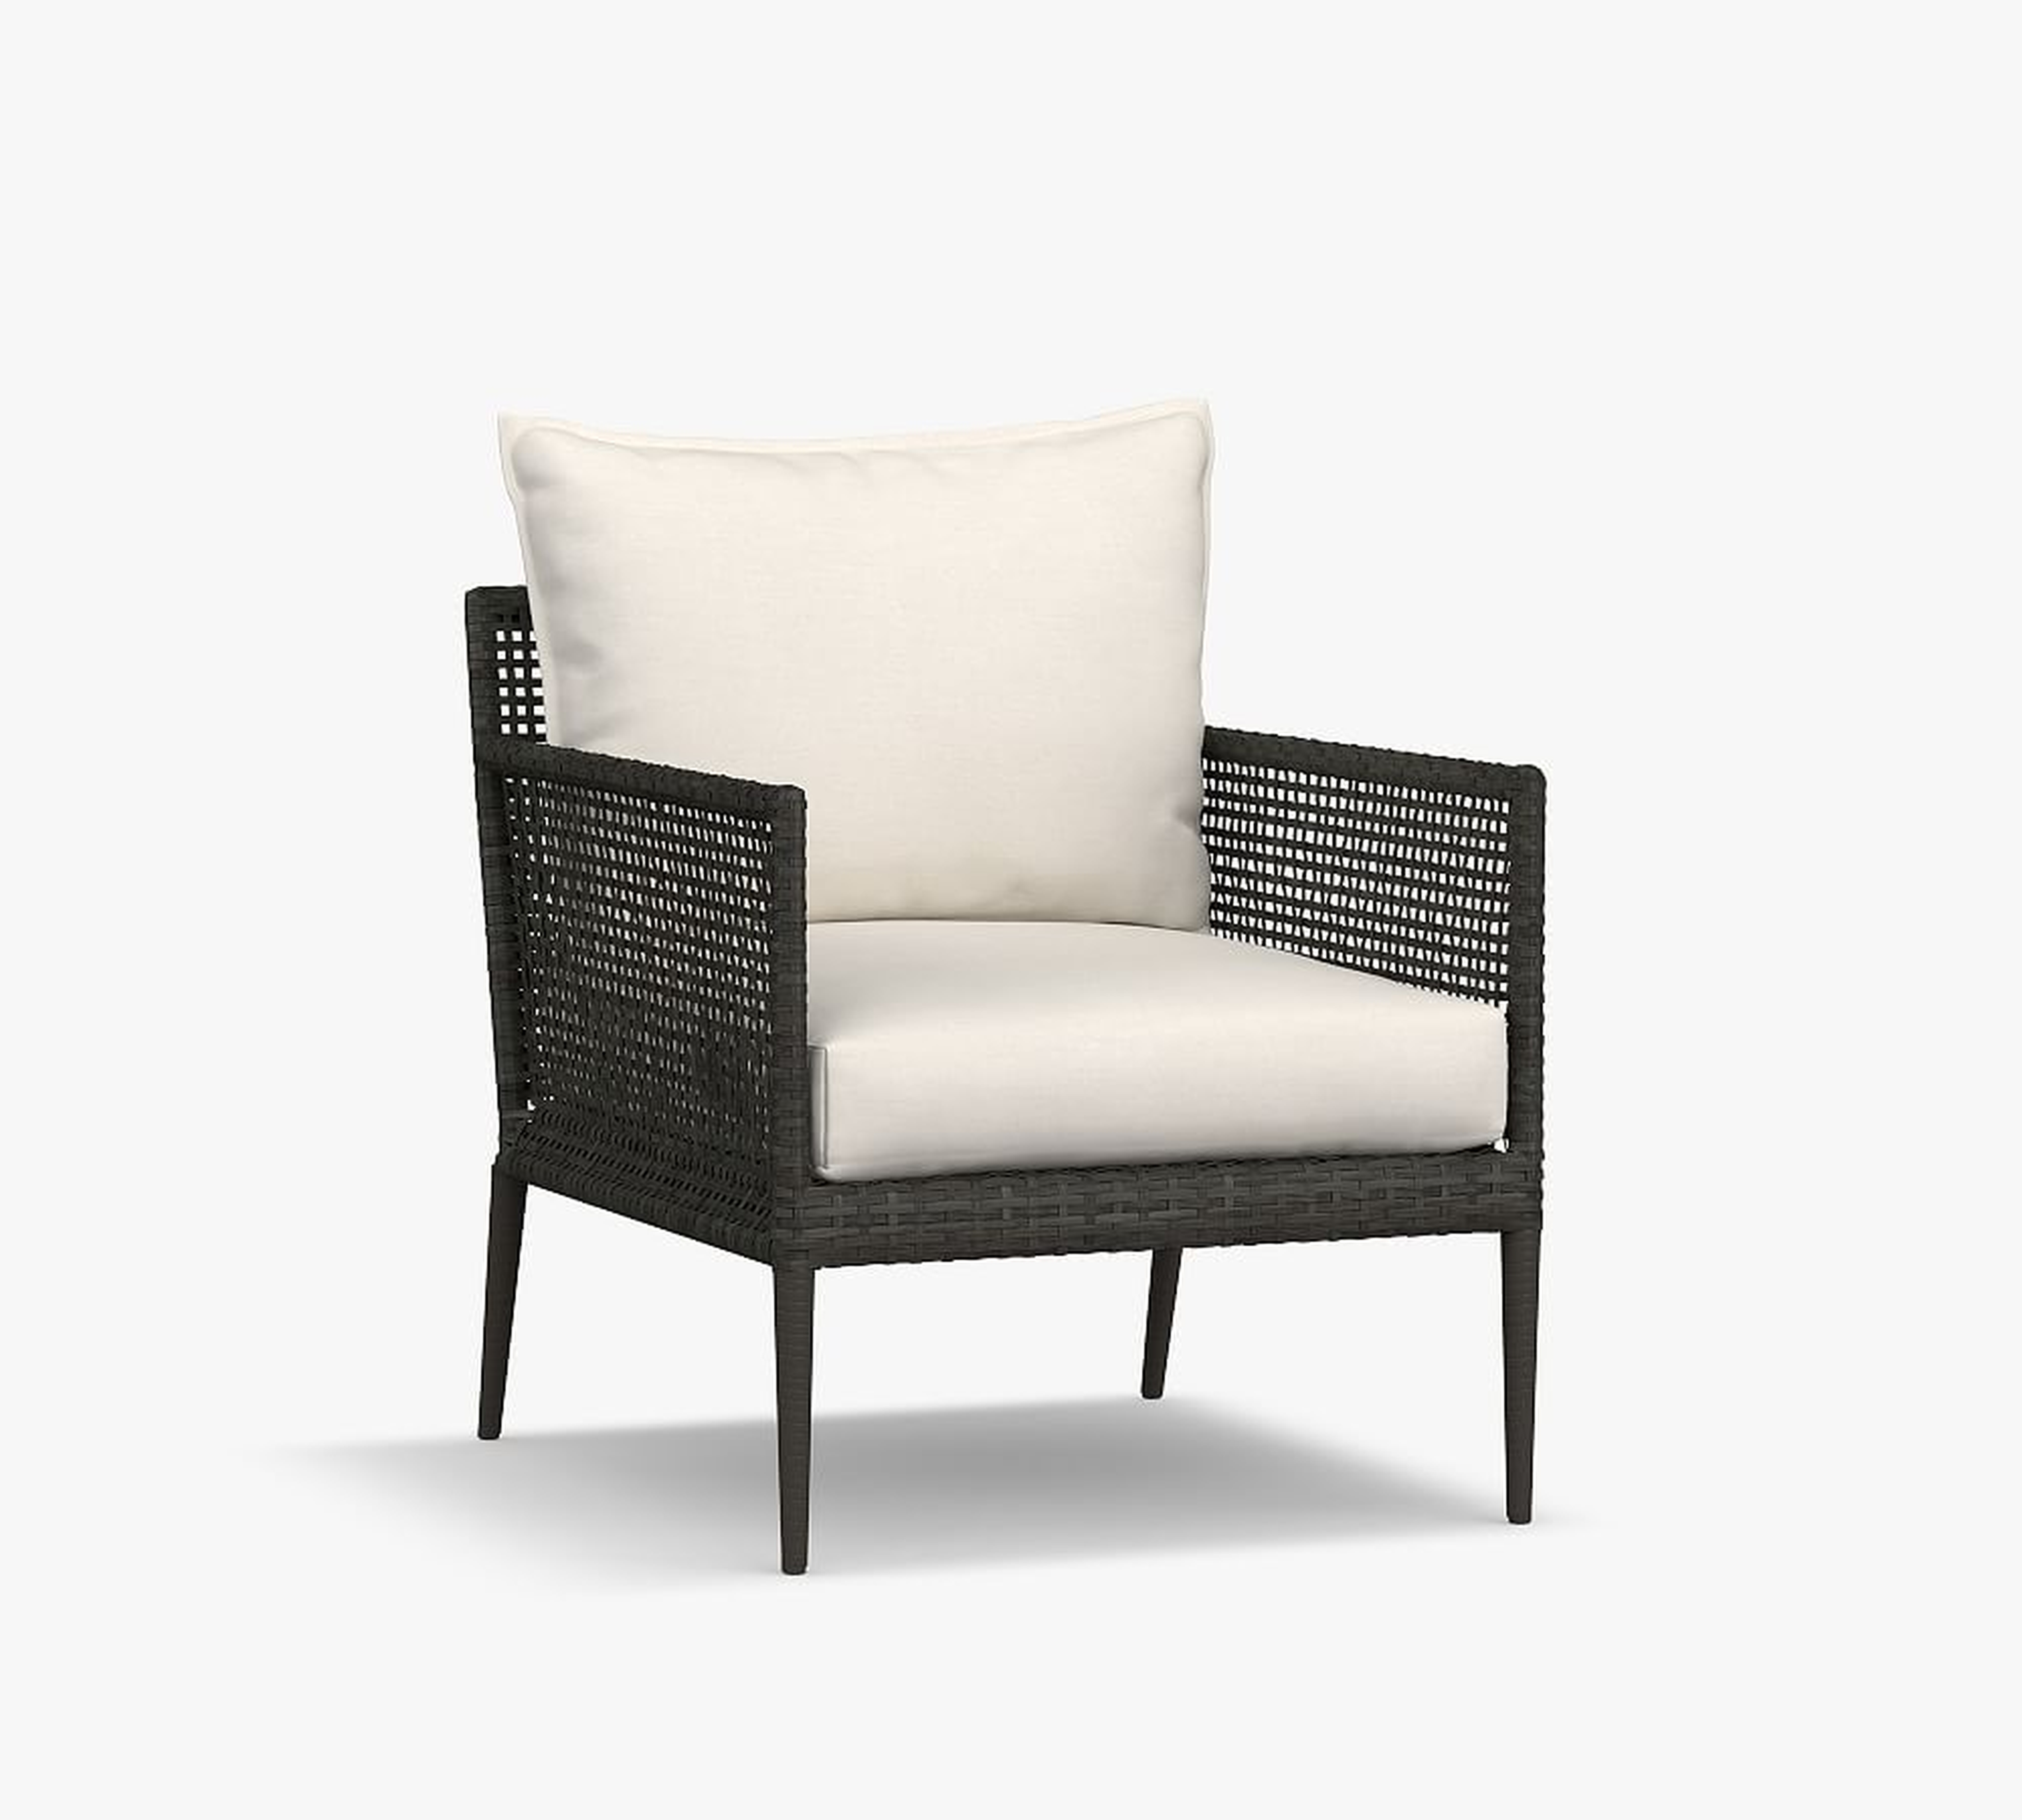 Cammeray Wicker Lounge Chair with Cushion, Black - Pottery Barn